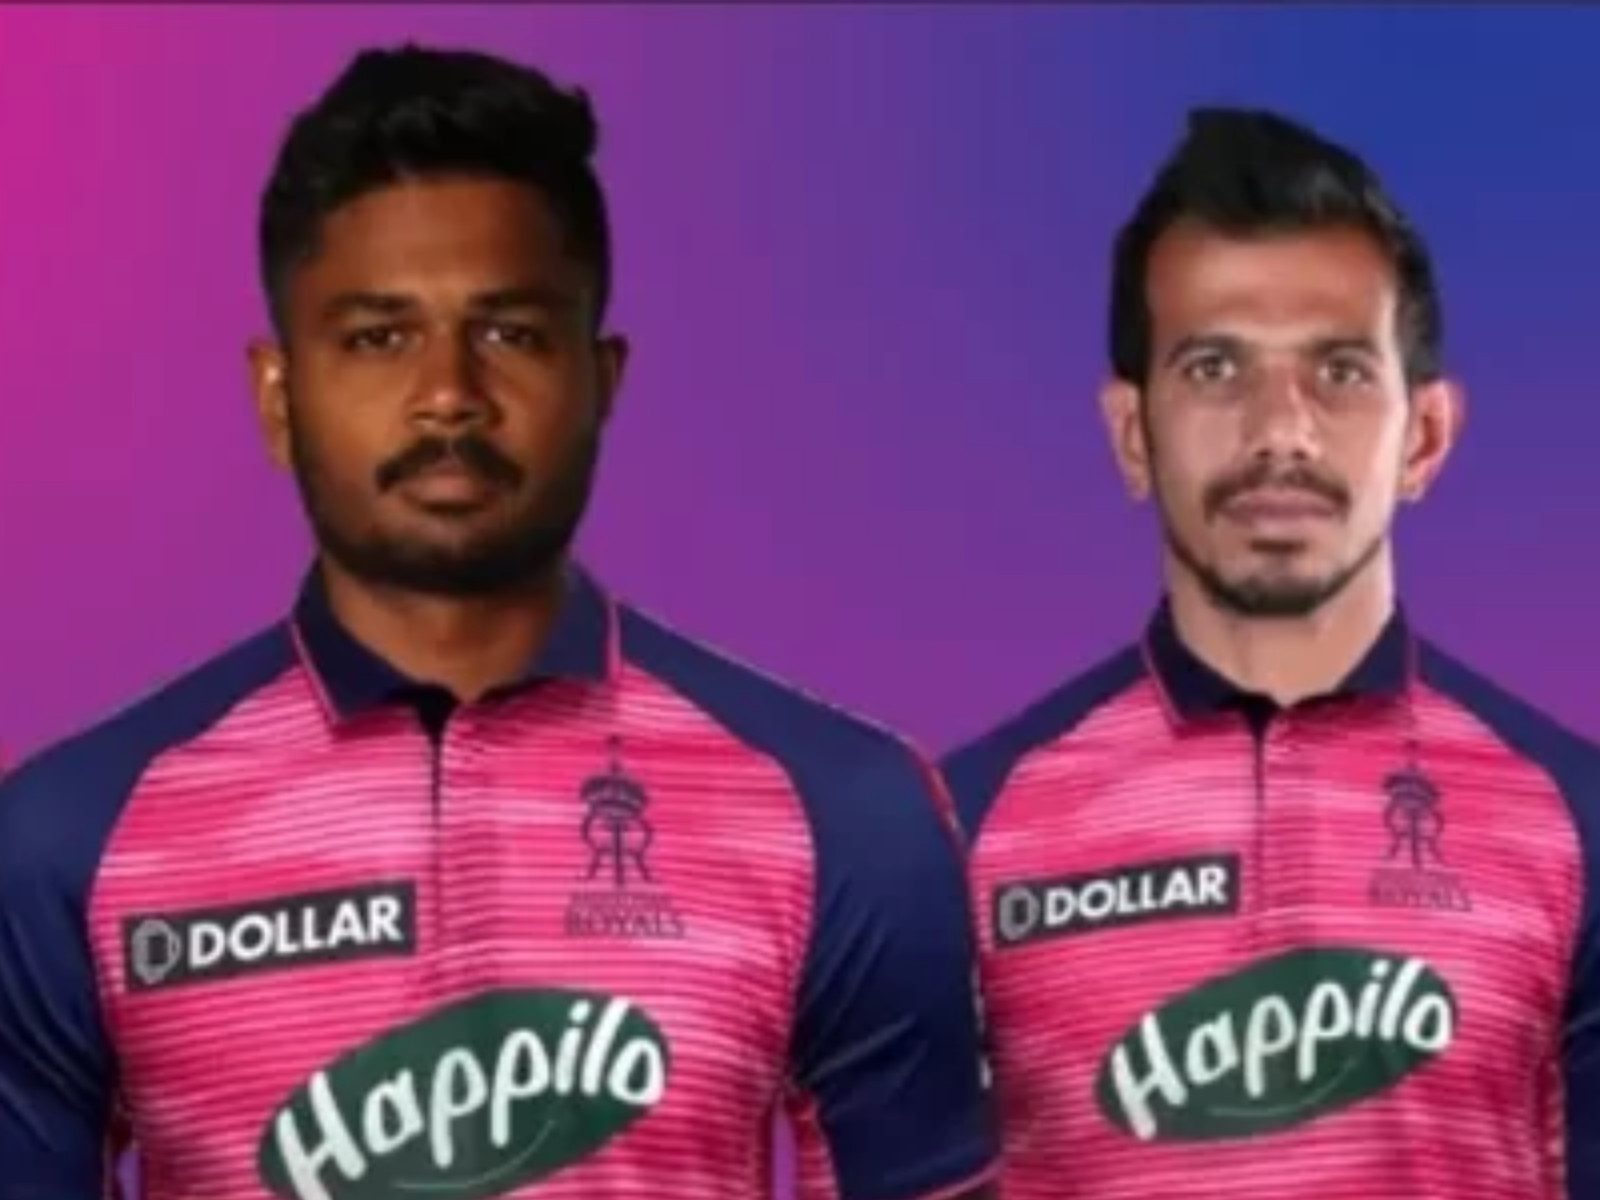 IPL 2022: [Watch] RCB unveil their new jersey ahead of the new season